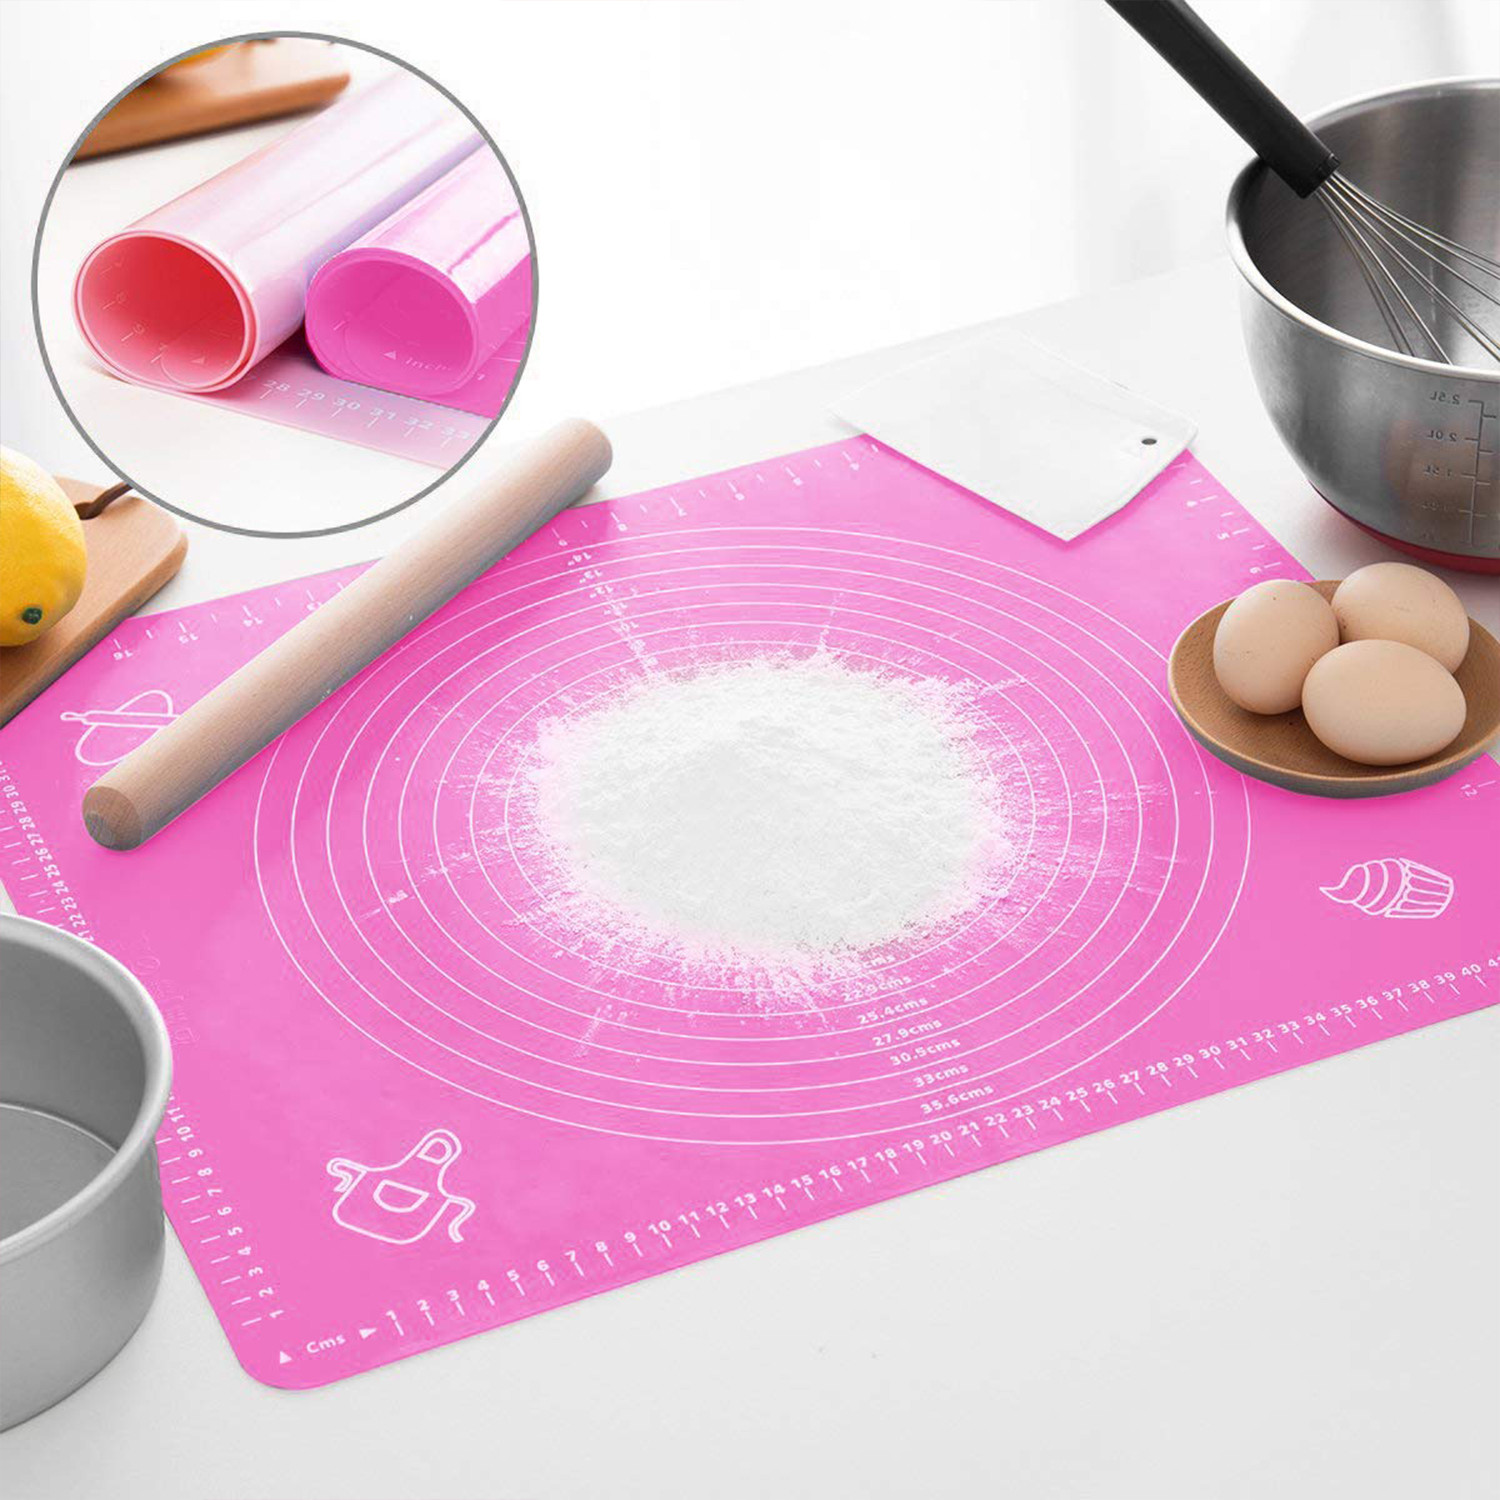 Kuber Industries Baking Mat|Silicone Non-Stick Stretchable Kneading Mat|Fondant Rolling Mat For Kitchen,Roti,Chapati,Cake,19 x 16 Inche (Pink)